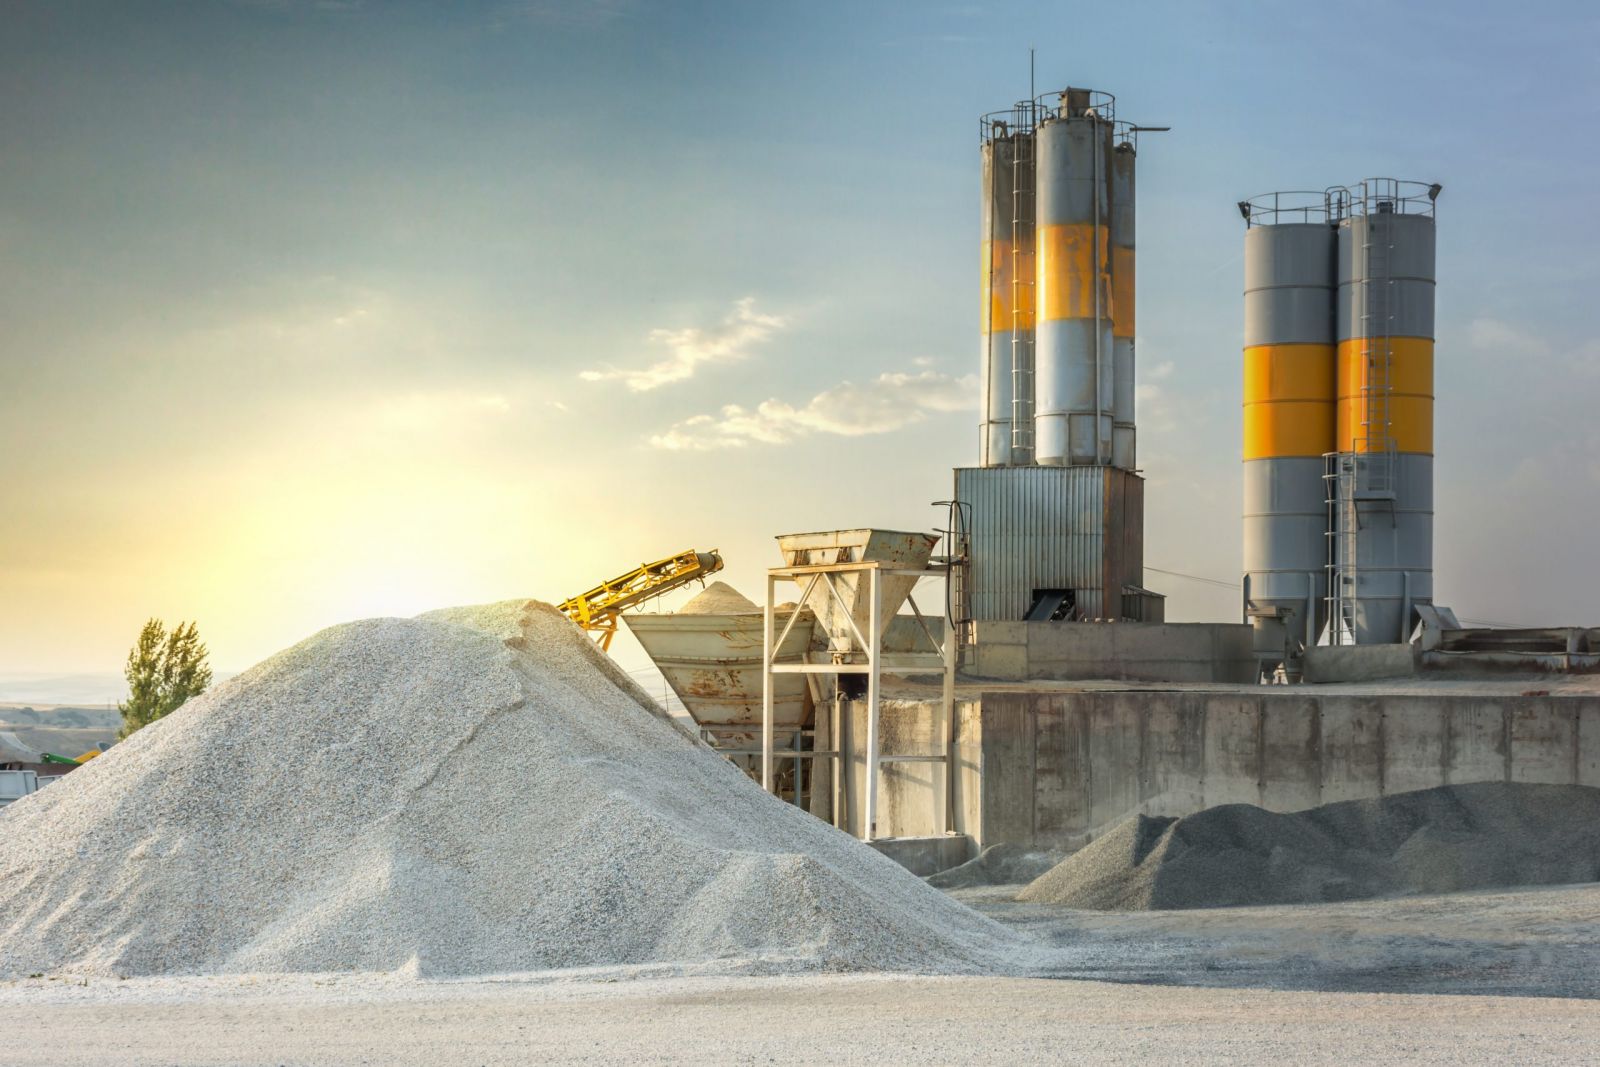 Concrete production grows in 2021 